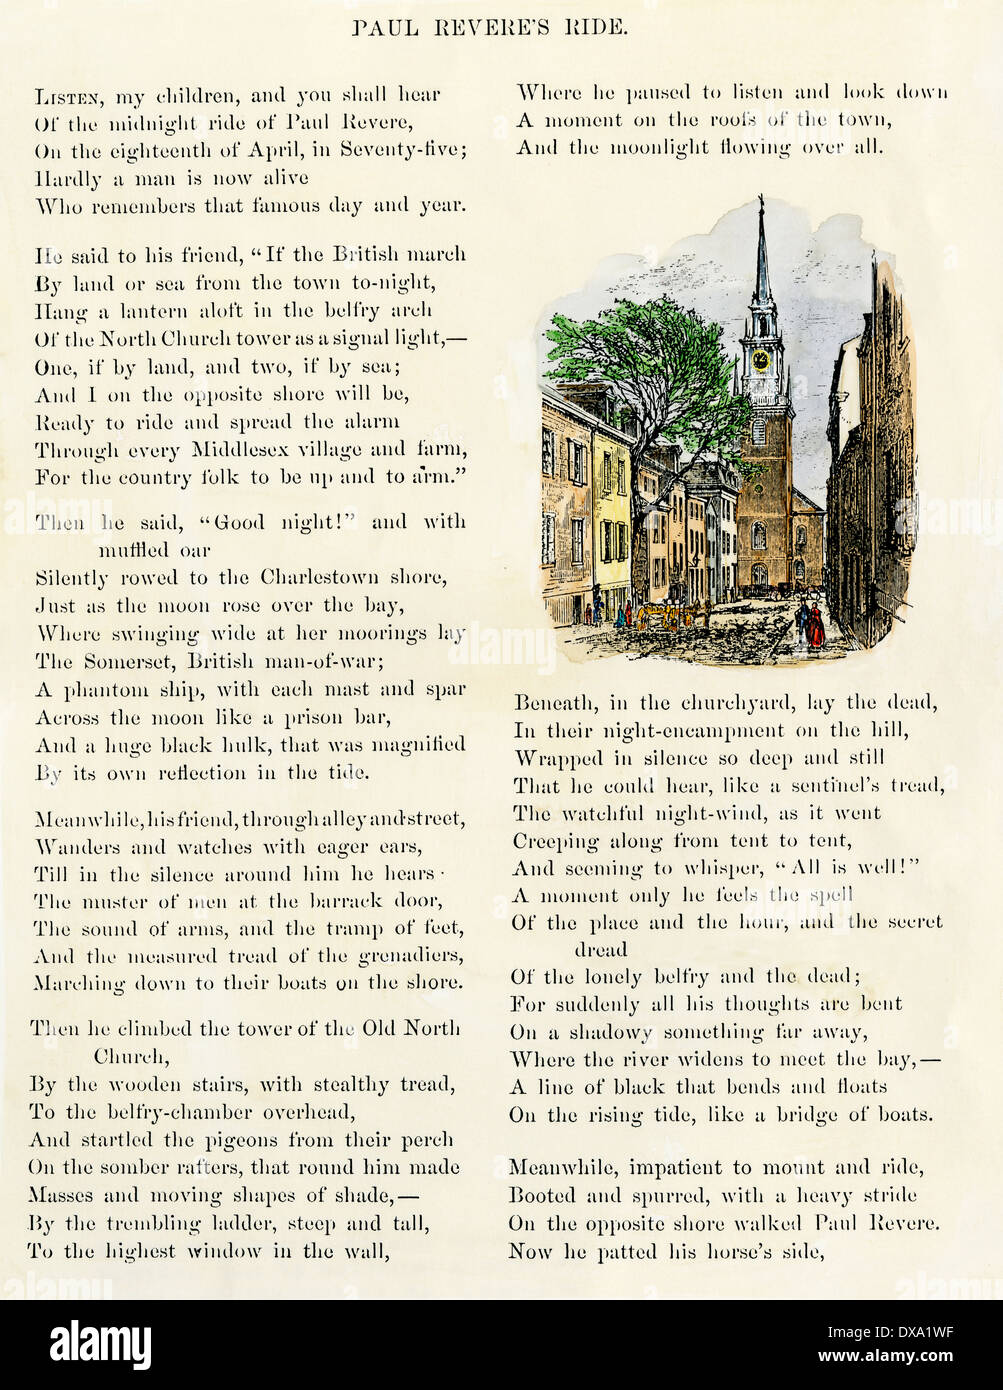 Illustrated page of 'Paul Revere's Ride' by Henry Wadsworth Longfellow, 1879. Hand-colored woodcut Stock Photo